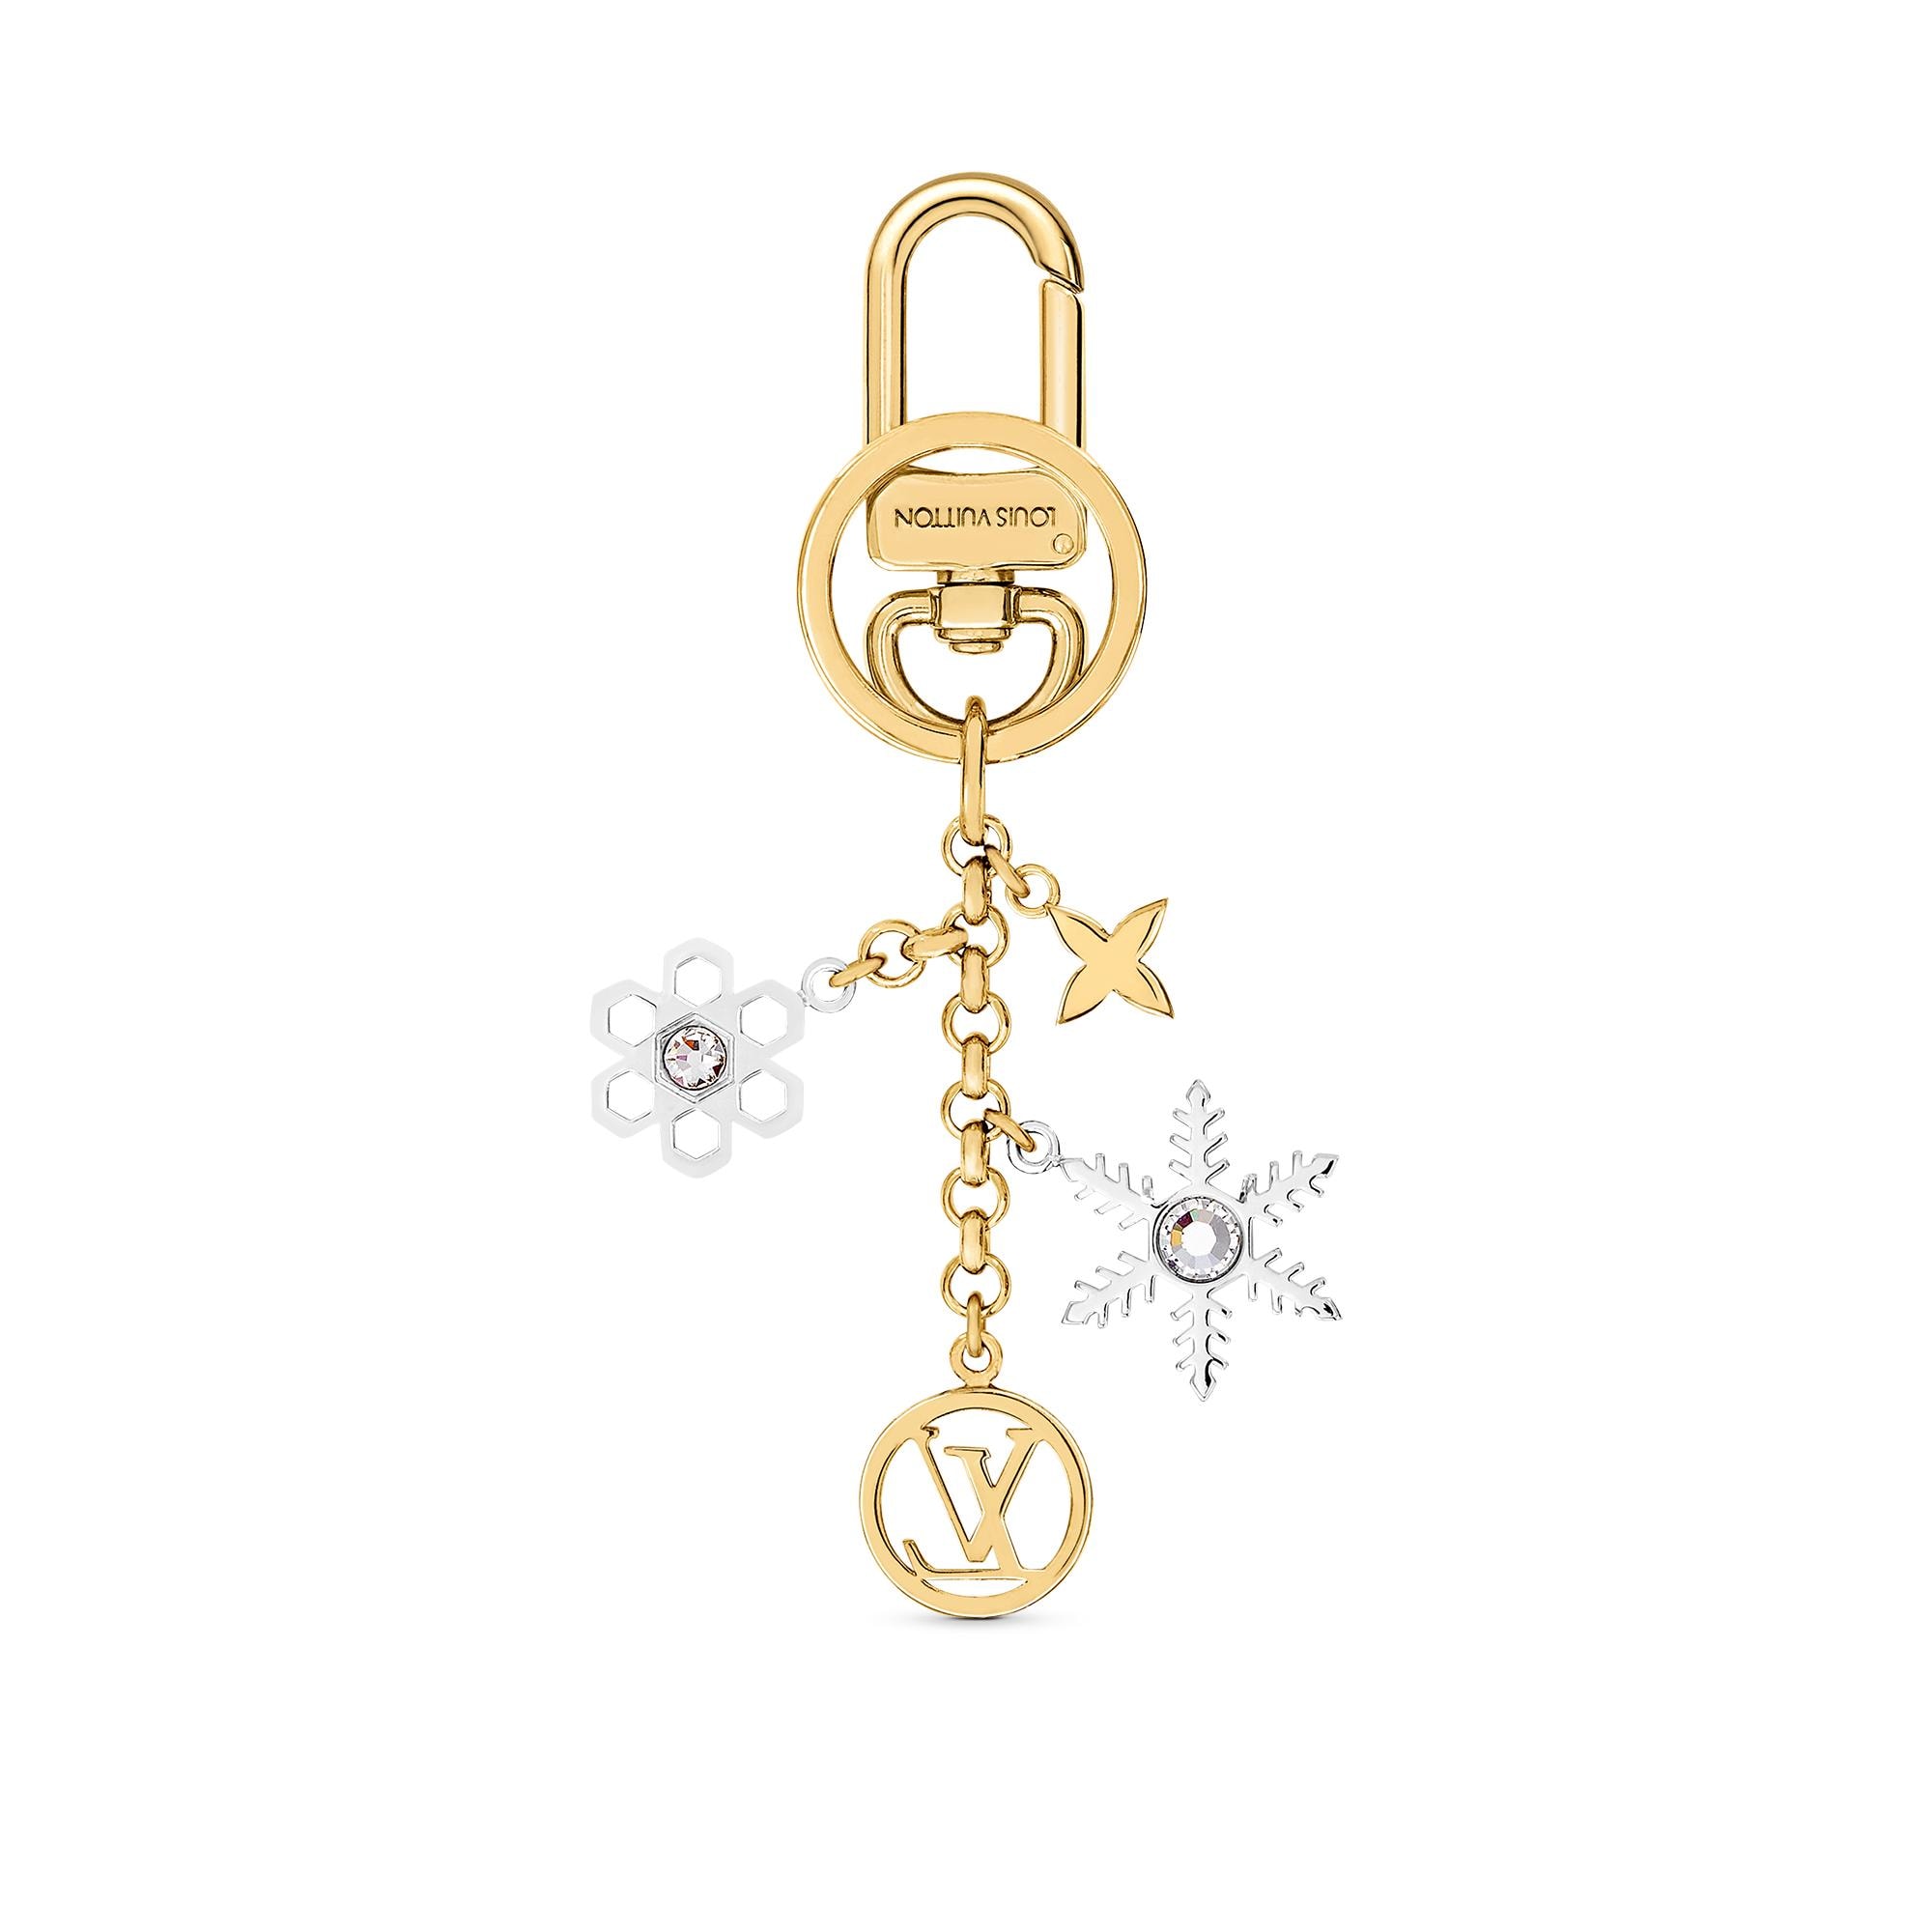 Louis Vuitton M01359 Twinkling Keyring and Bag Charm , Gold, One Size